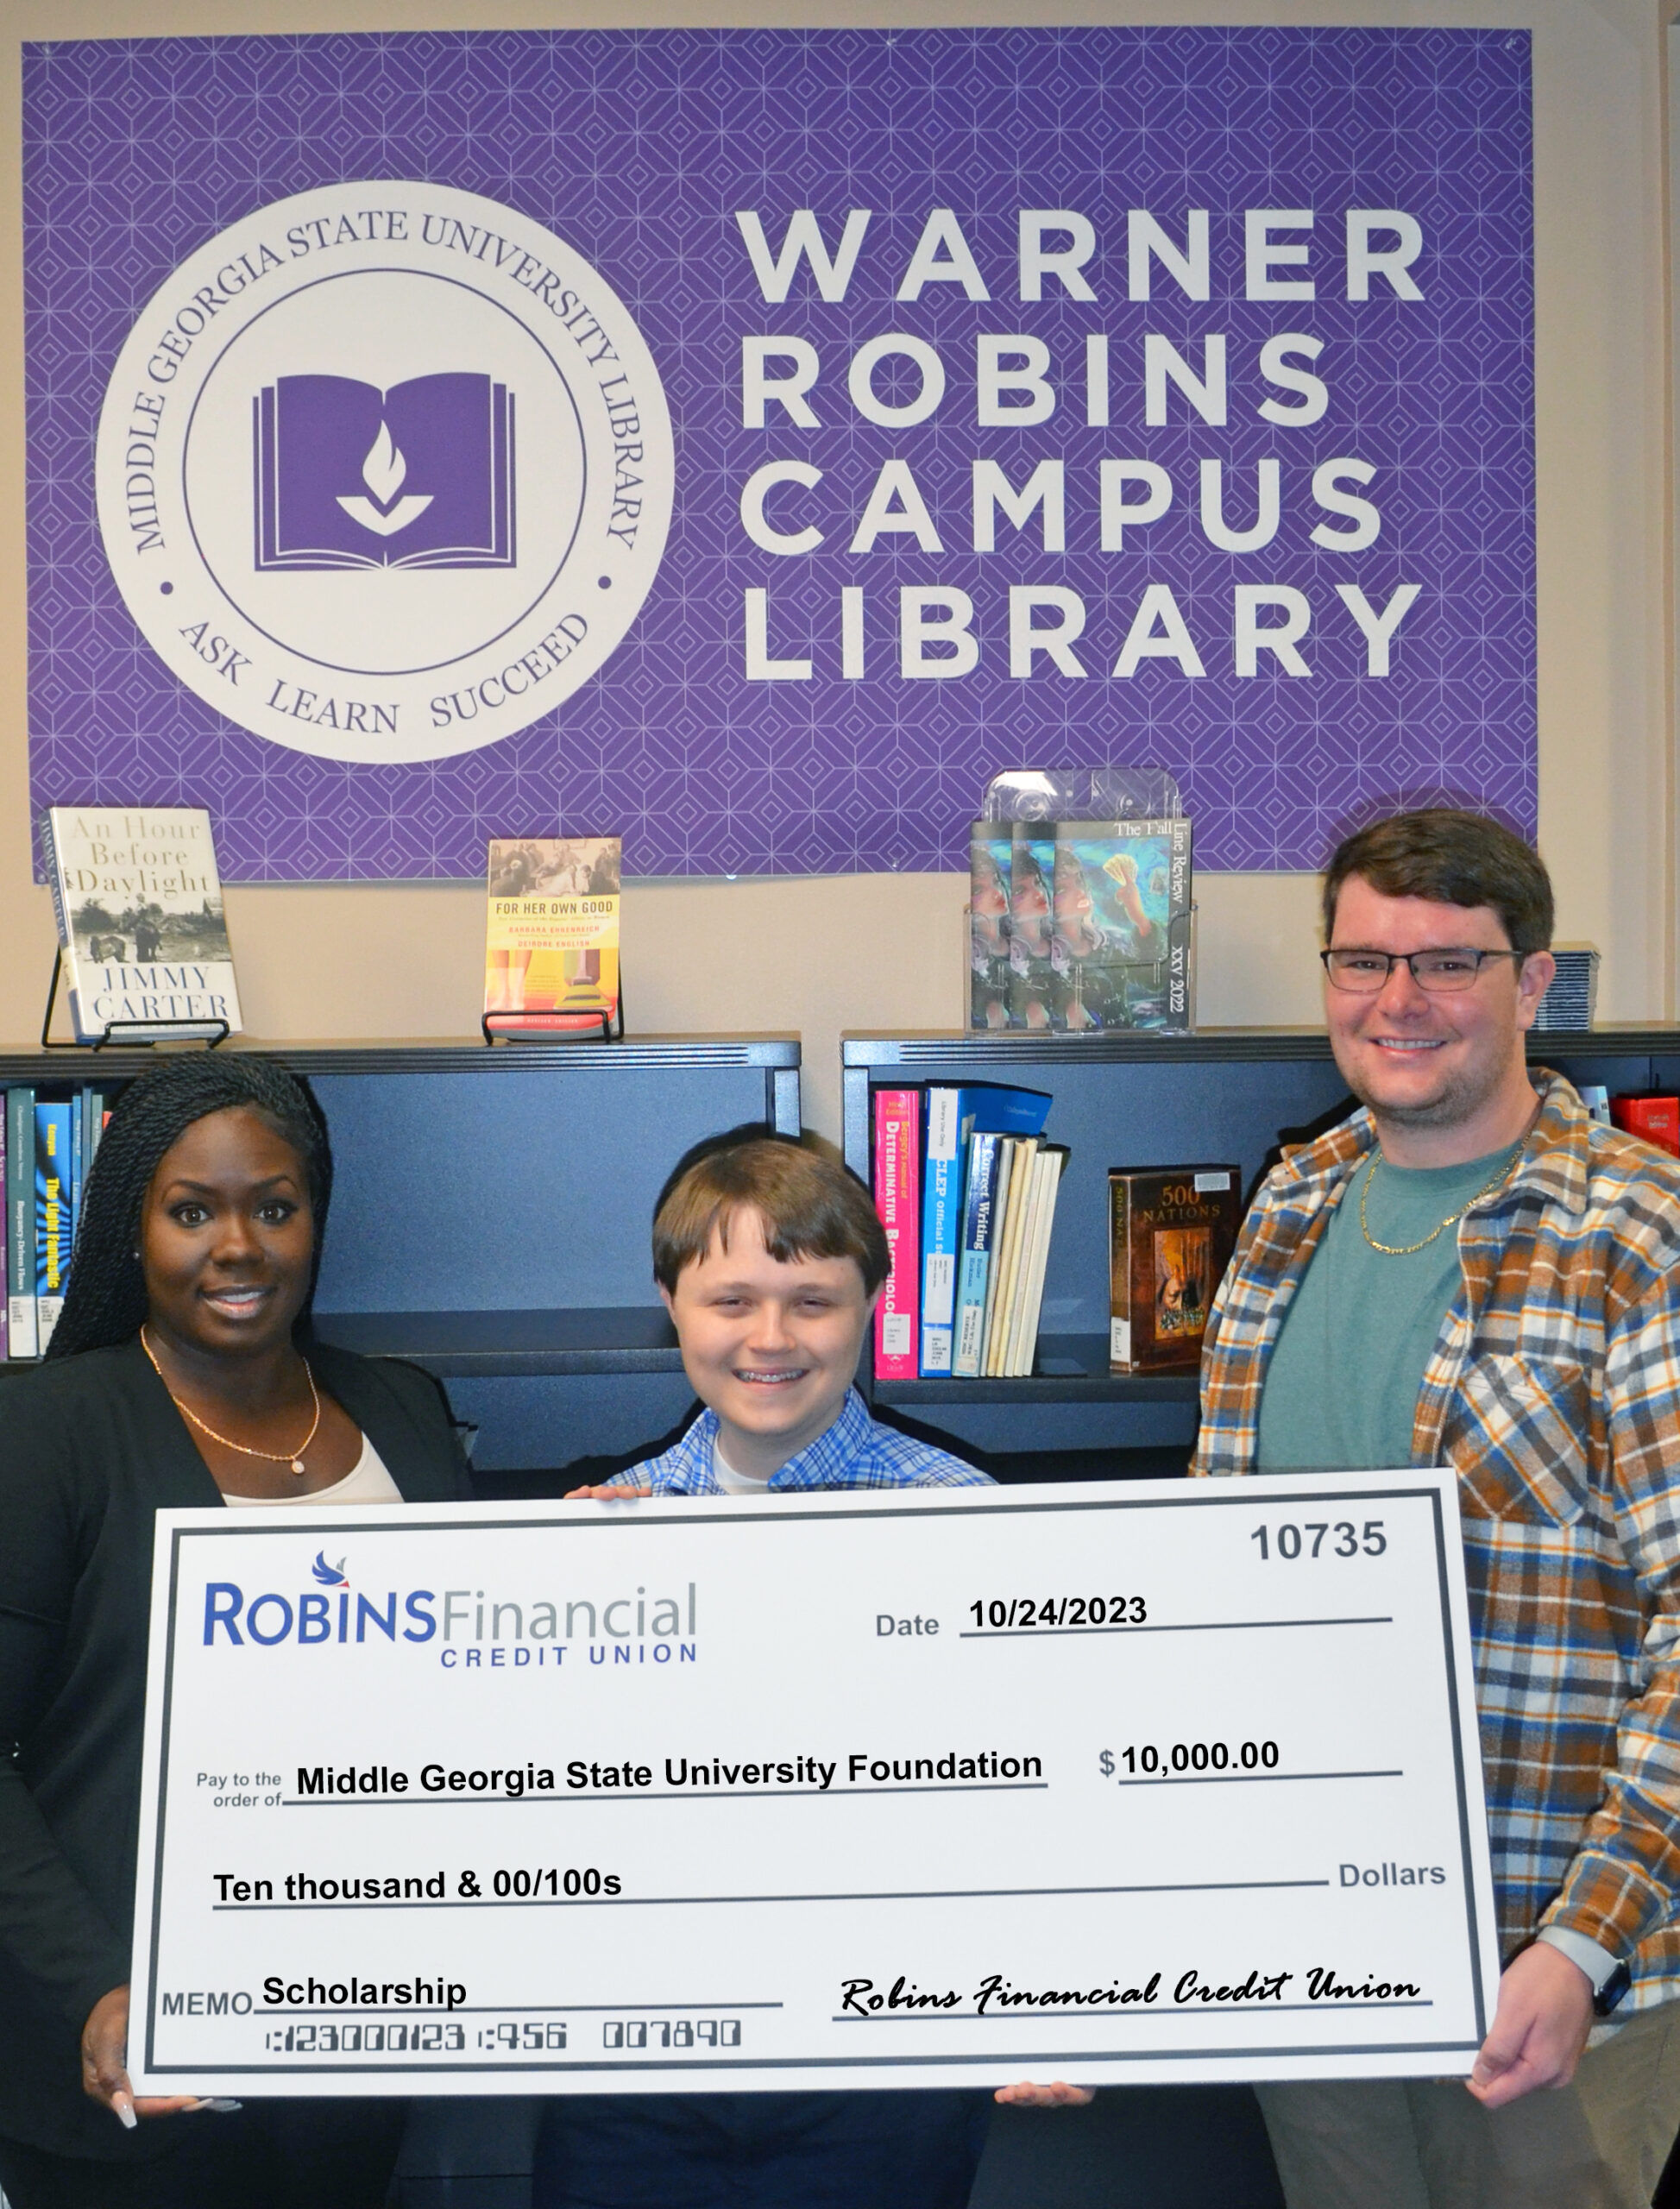 Robins Financial Credit Union Provides Scholarship to Local College Students